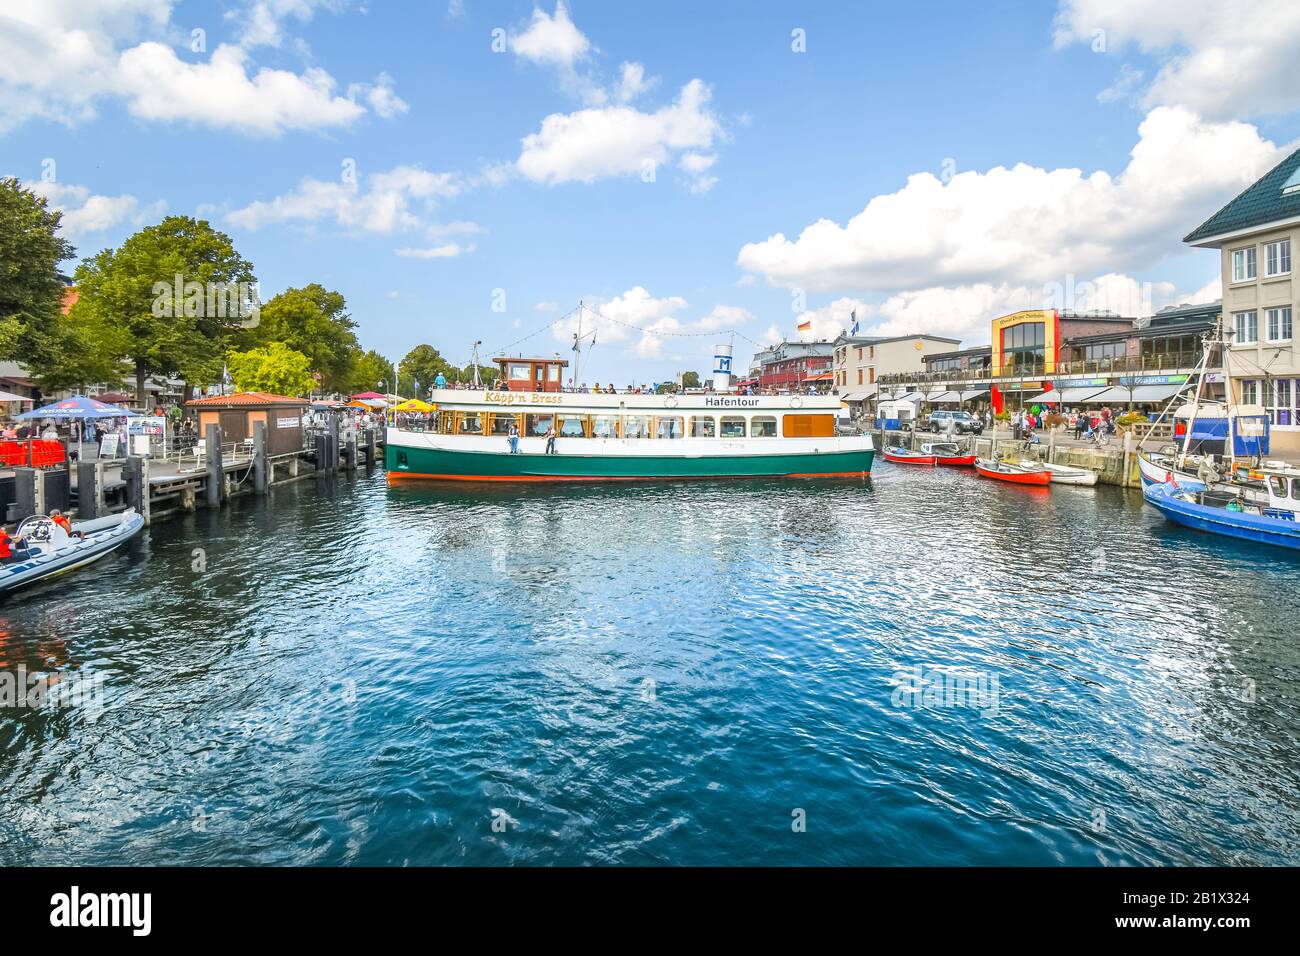 A tourist cruise boat turns sideways in the Alter Strom canal alongside shops and fishing boats on the Baltic Sea resort. Stock Photo